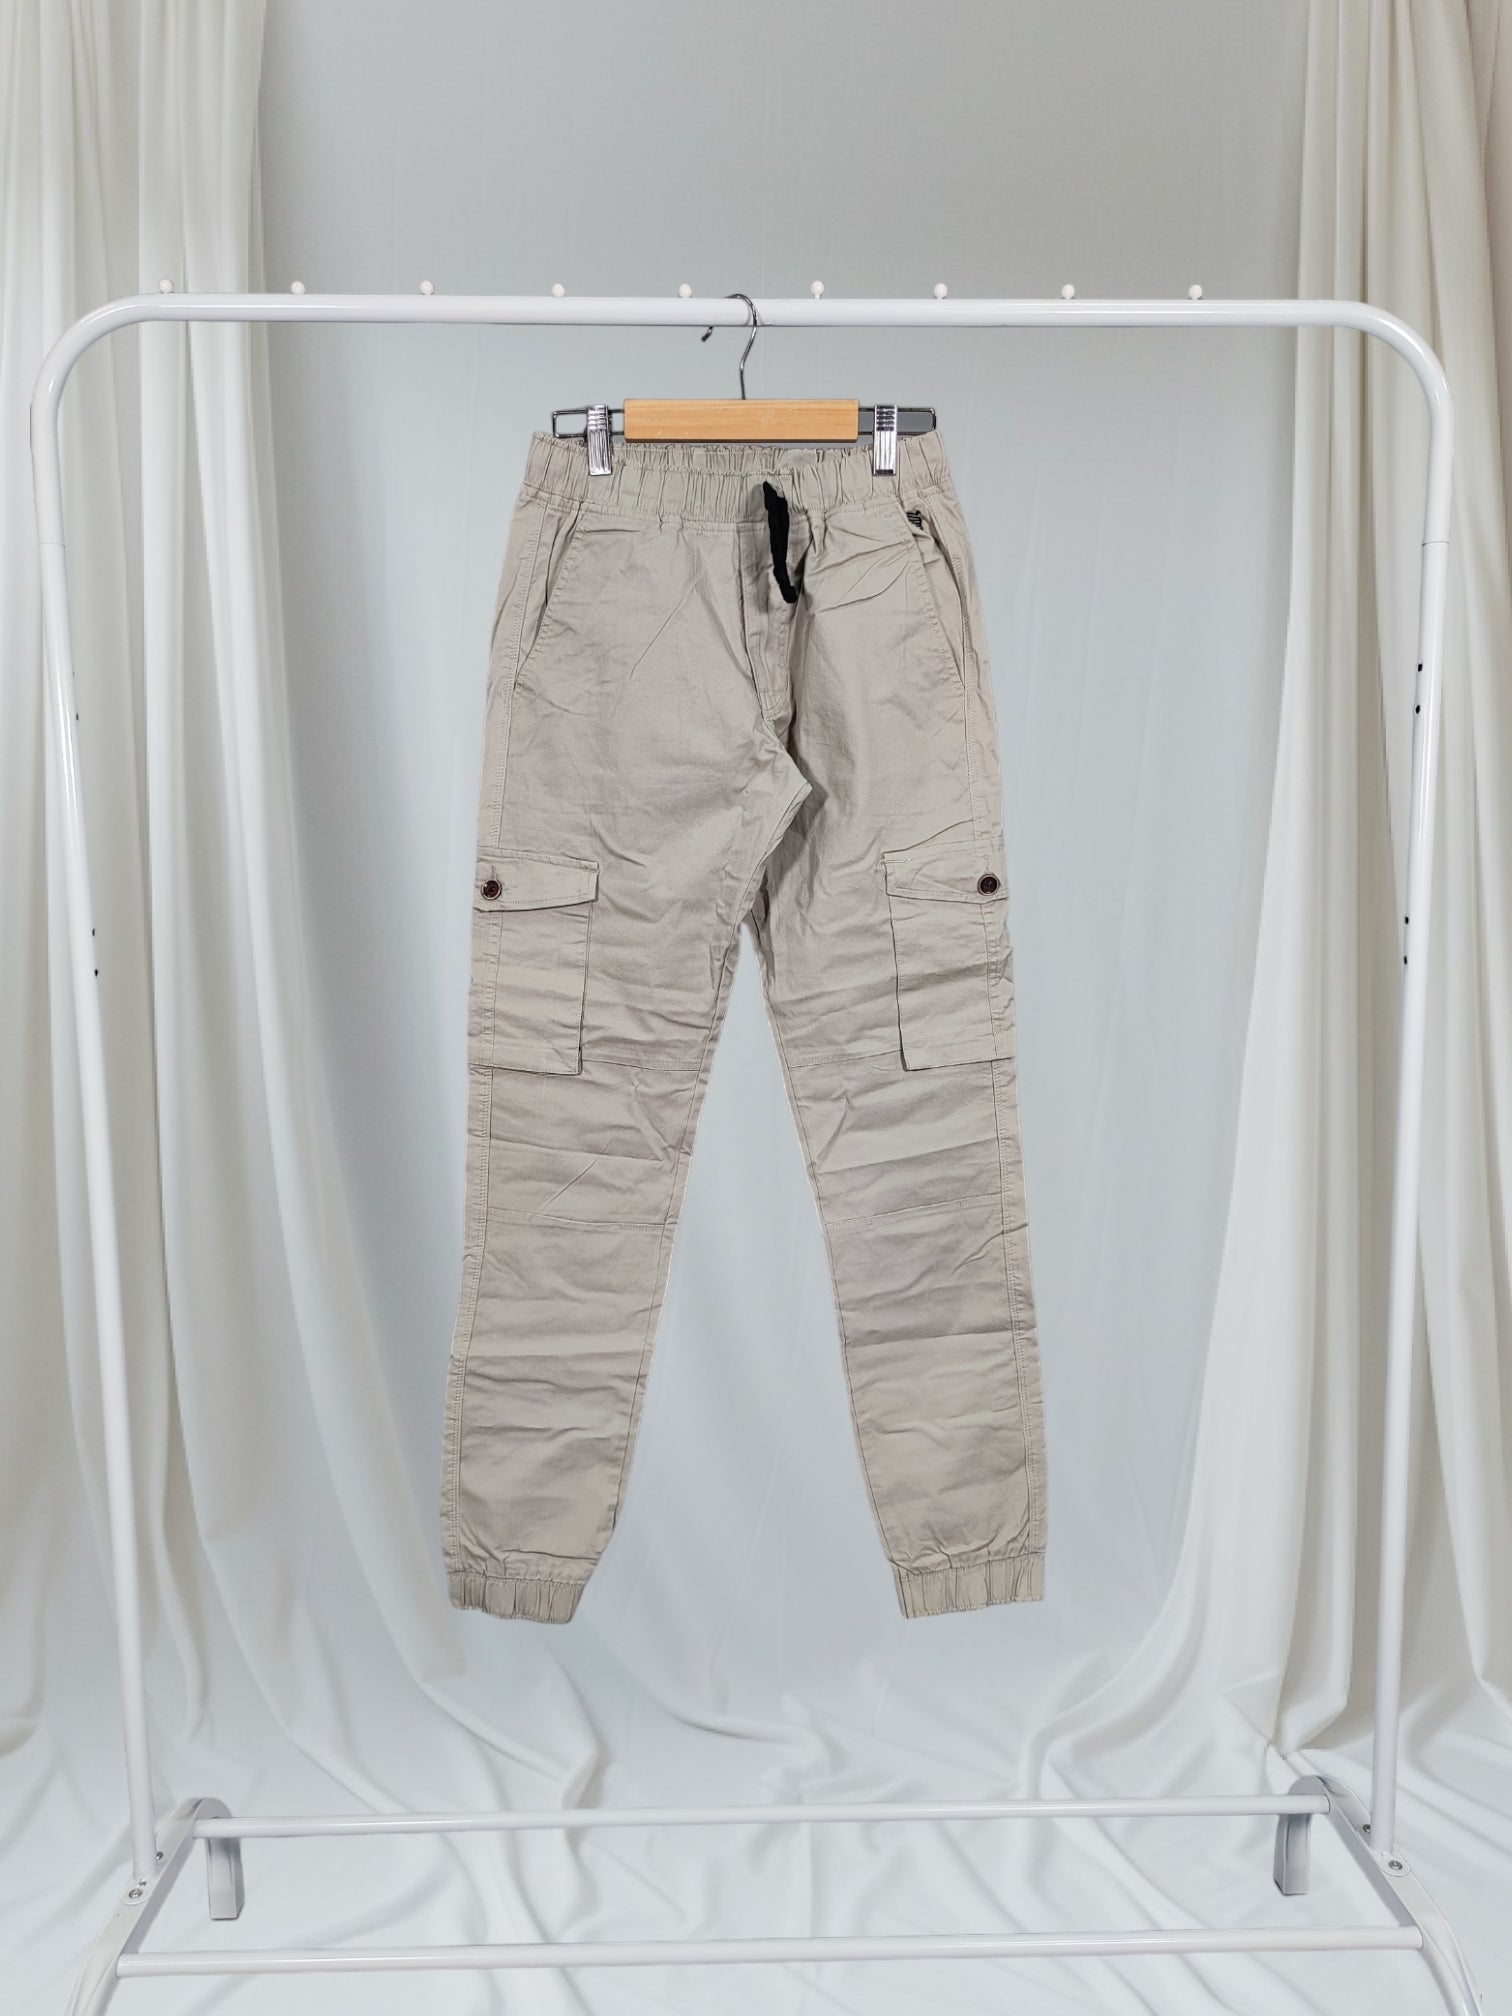 R20 Mens Gray Cargo Pant, Jogger Pant With Bottom Cuff, 6 Pocket